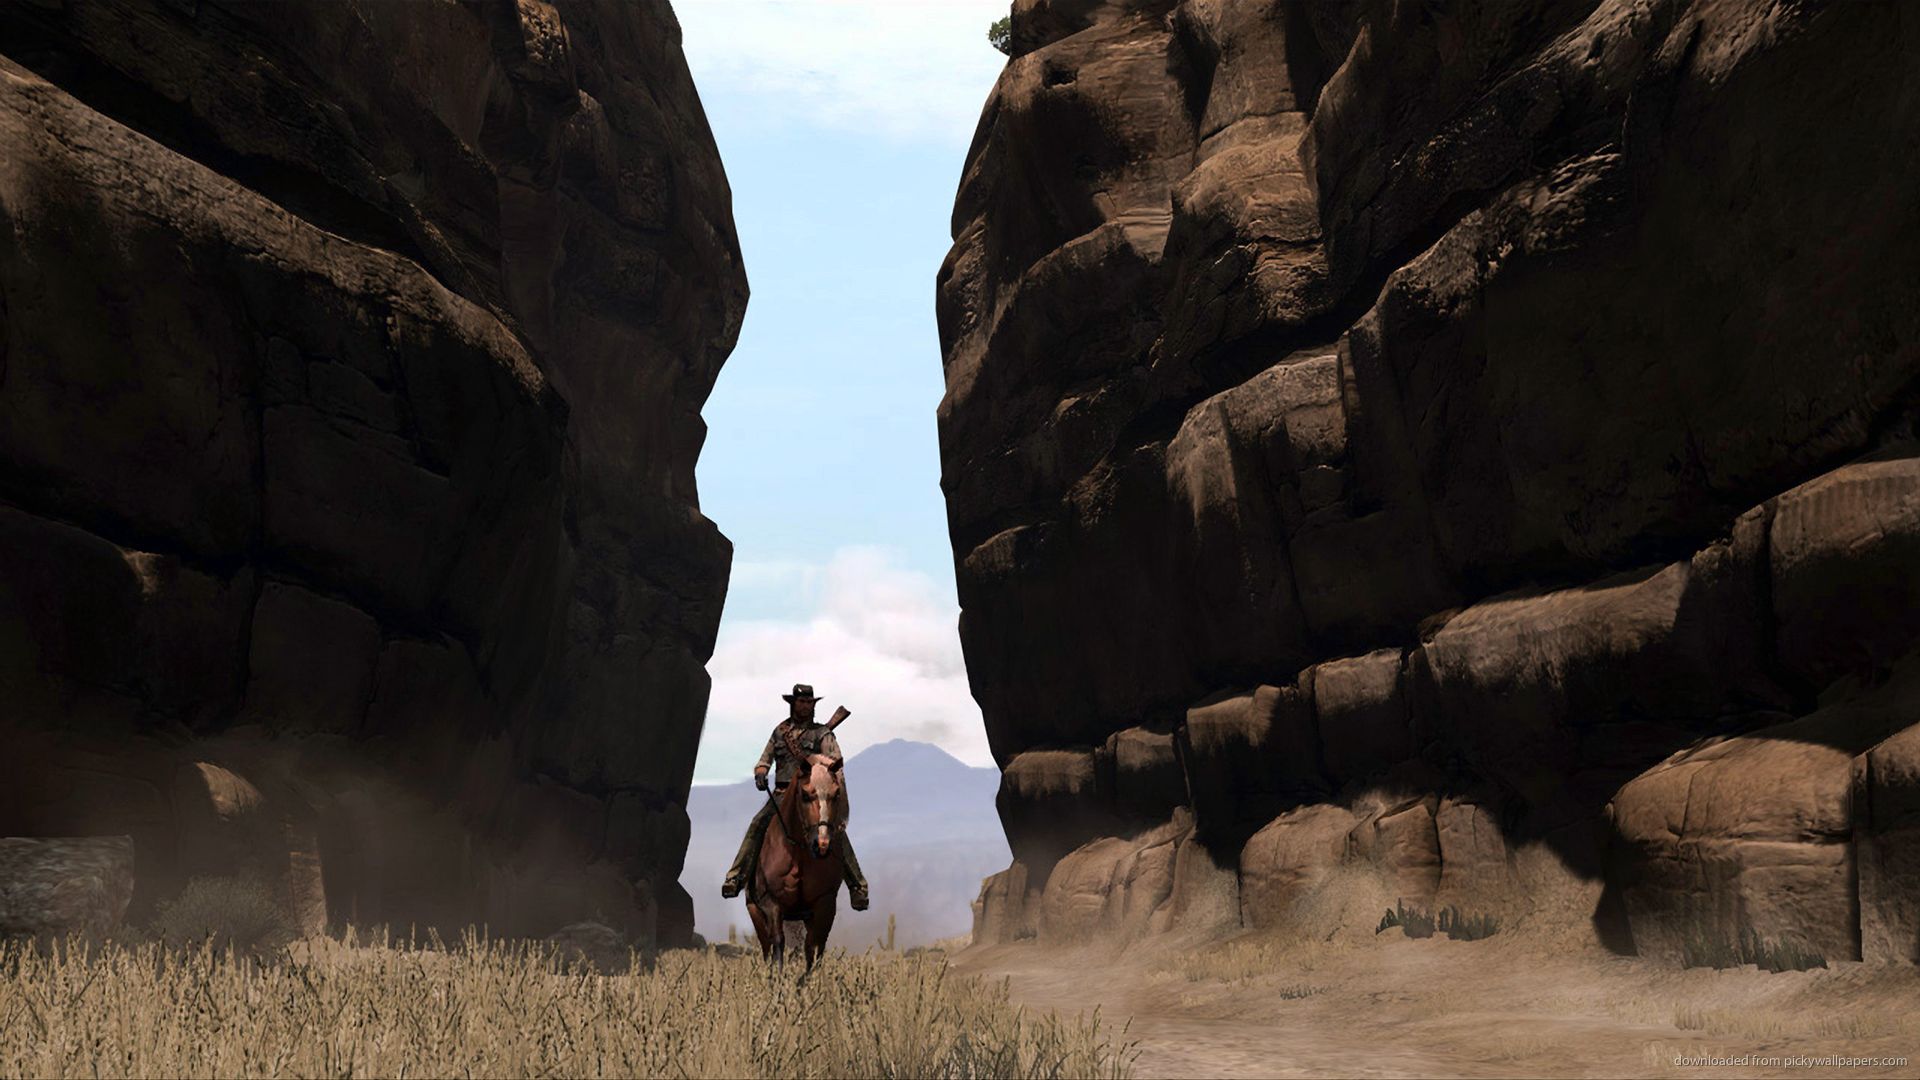 RDR Canyon Wallpaper For iPhone 3G / 3GS